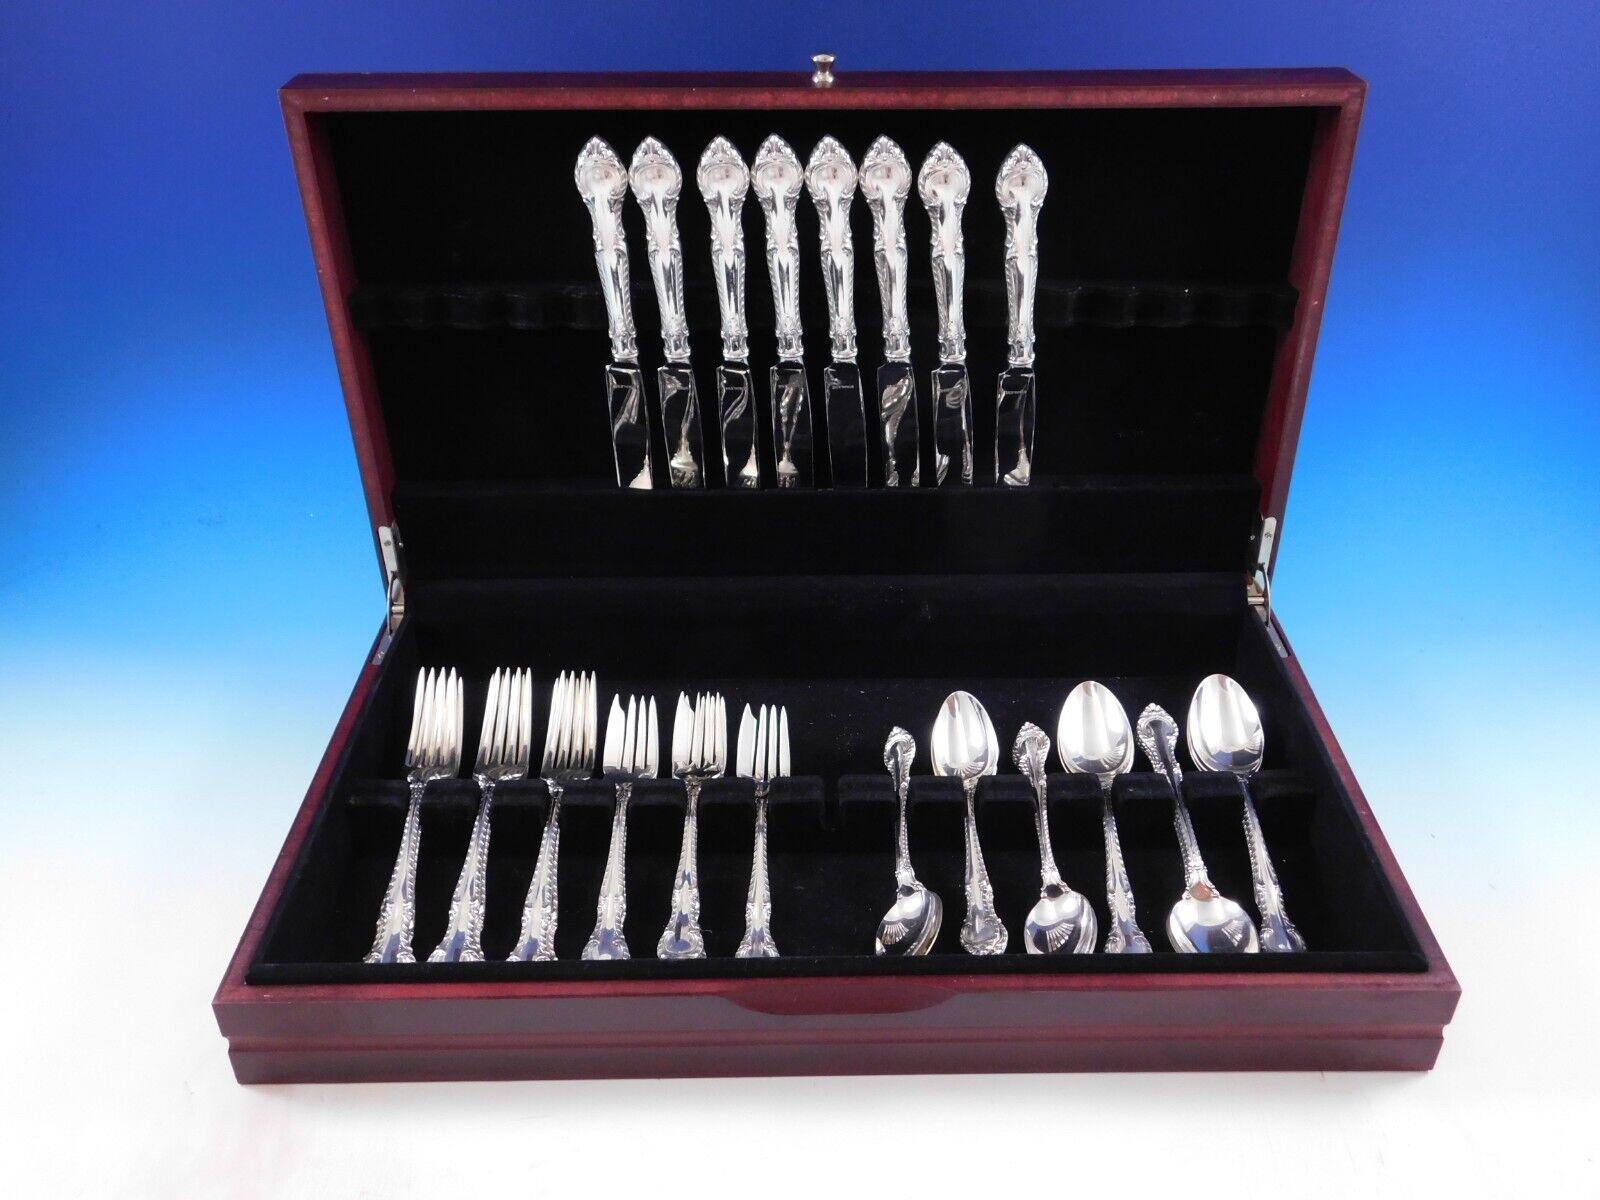 Gorgeous Dinner Size English Gadroon by Gorham sterling silver Flatware set, 40 pieces. This set includes:

8 Dinner Size Knives, 9 1/2